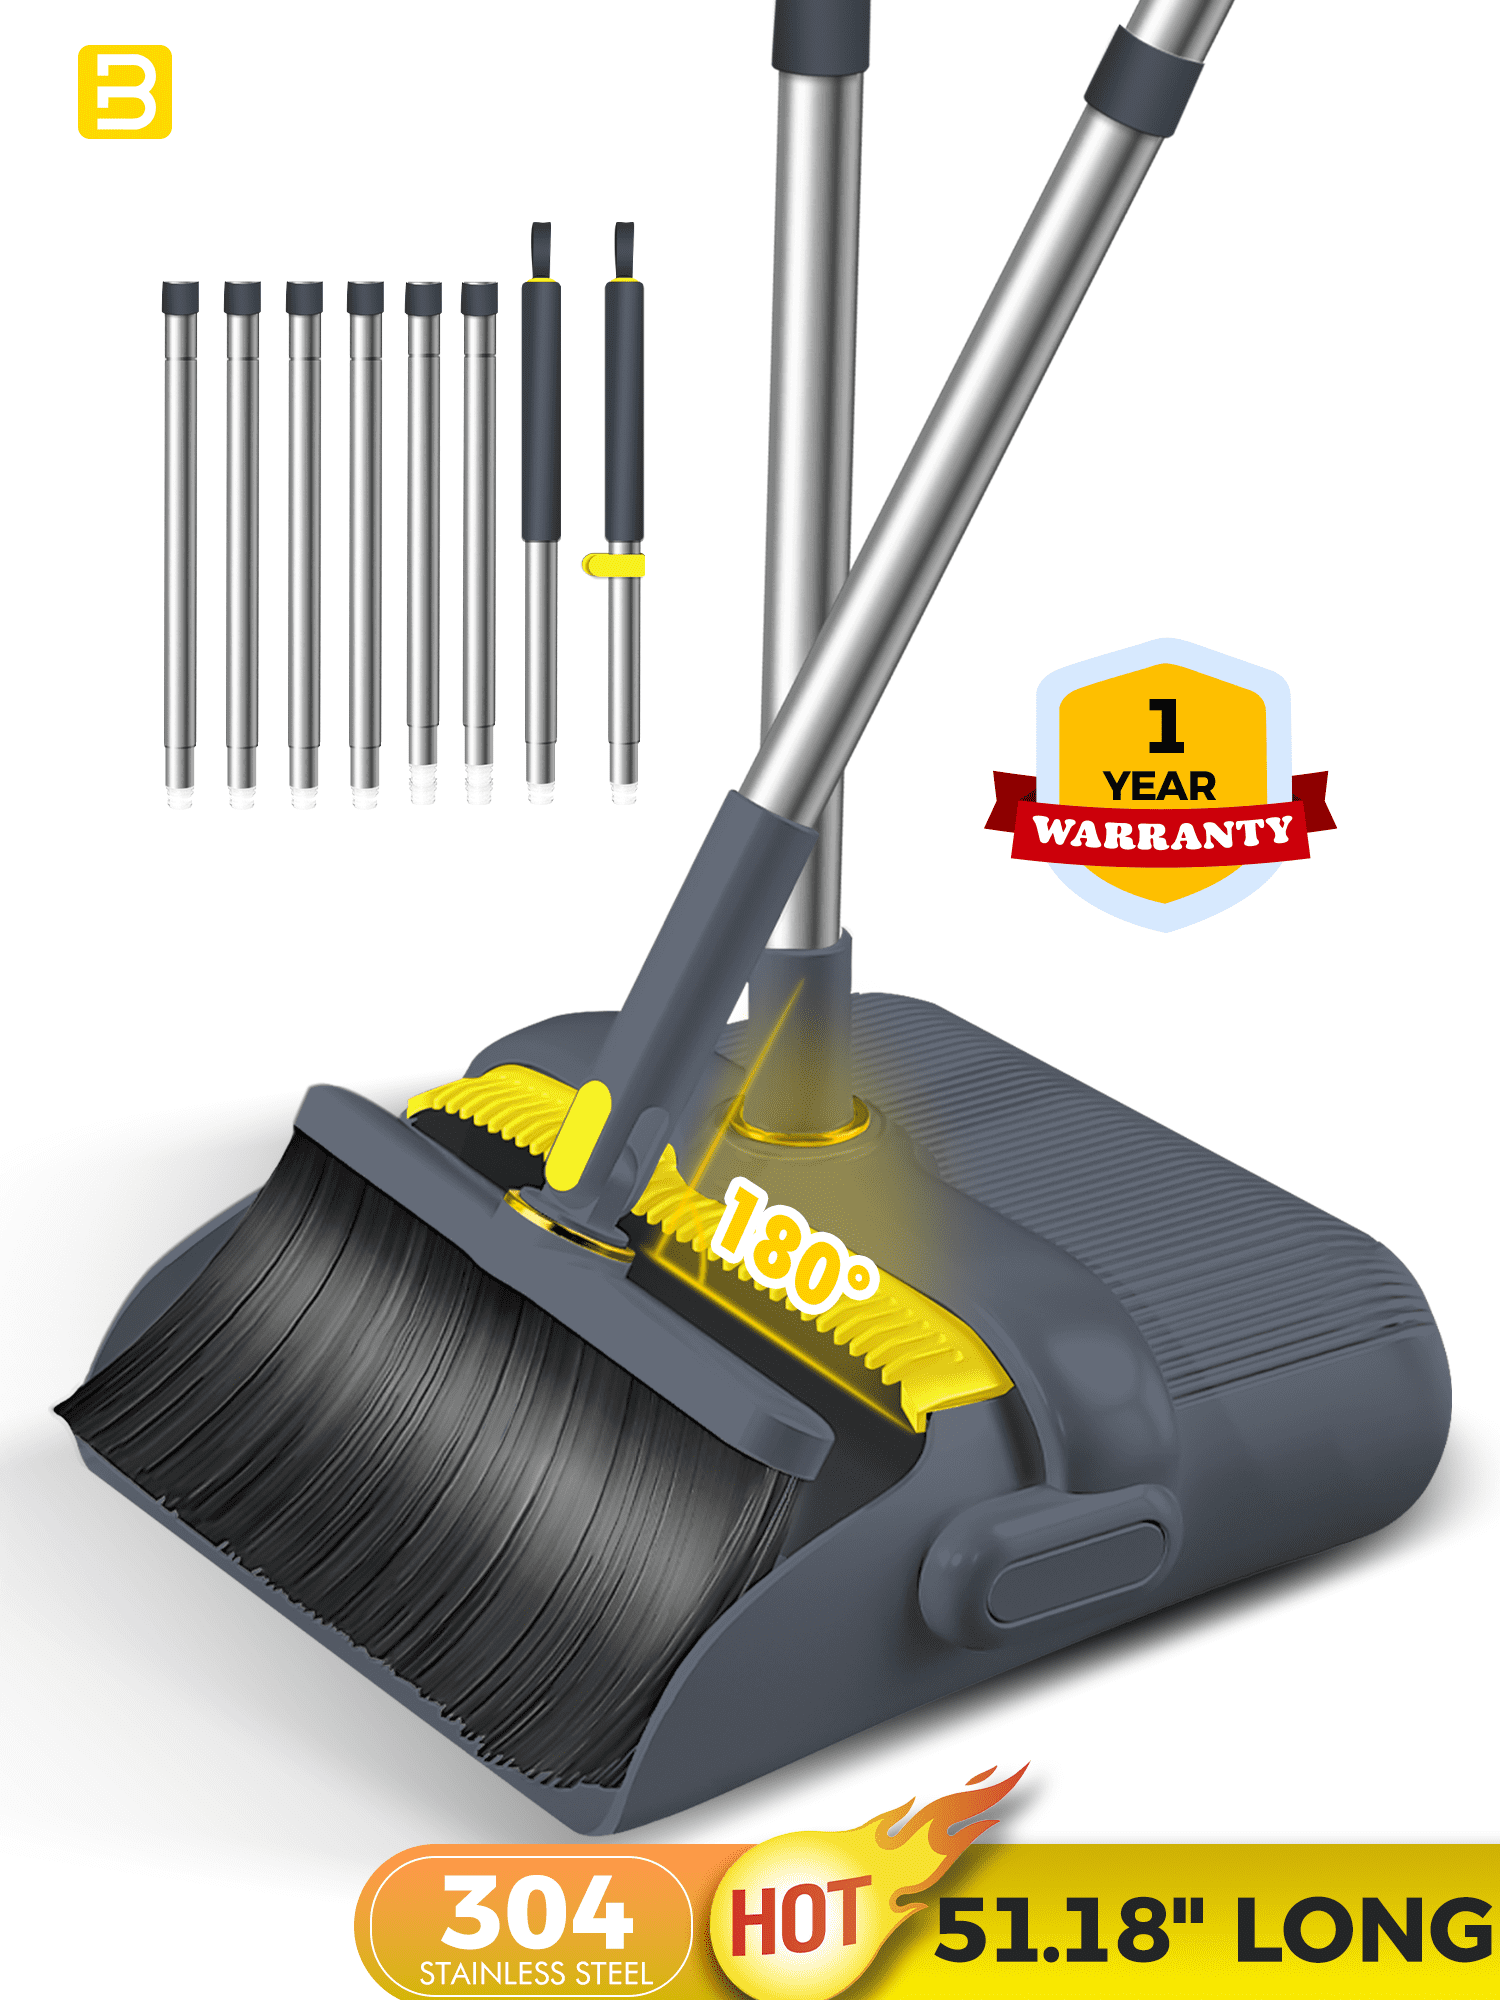 Broom and Dustpan Set for Home,Long Handle Broom with Upright Standing Dustpan,Broom and Dustpan Combo for Office Home Kitchen Lobby Floor Cleaning